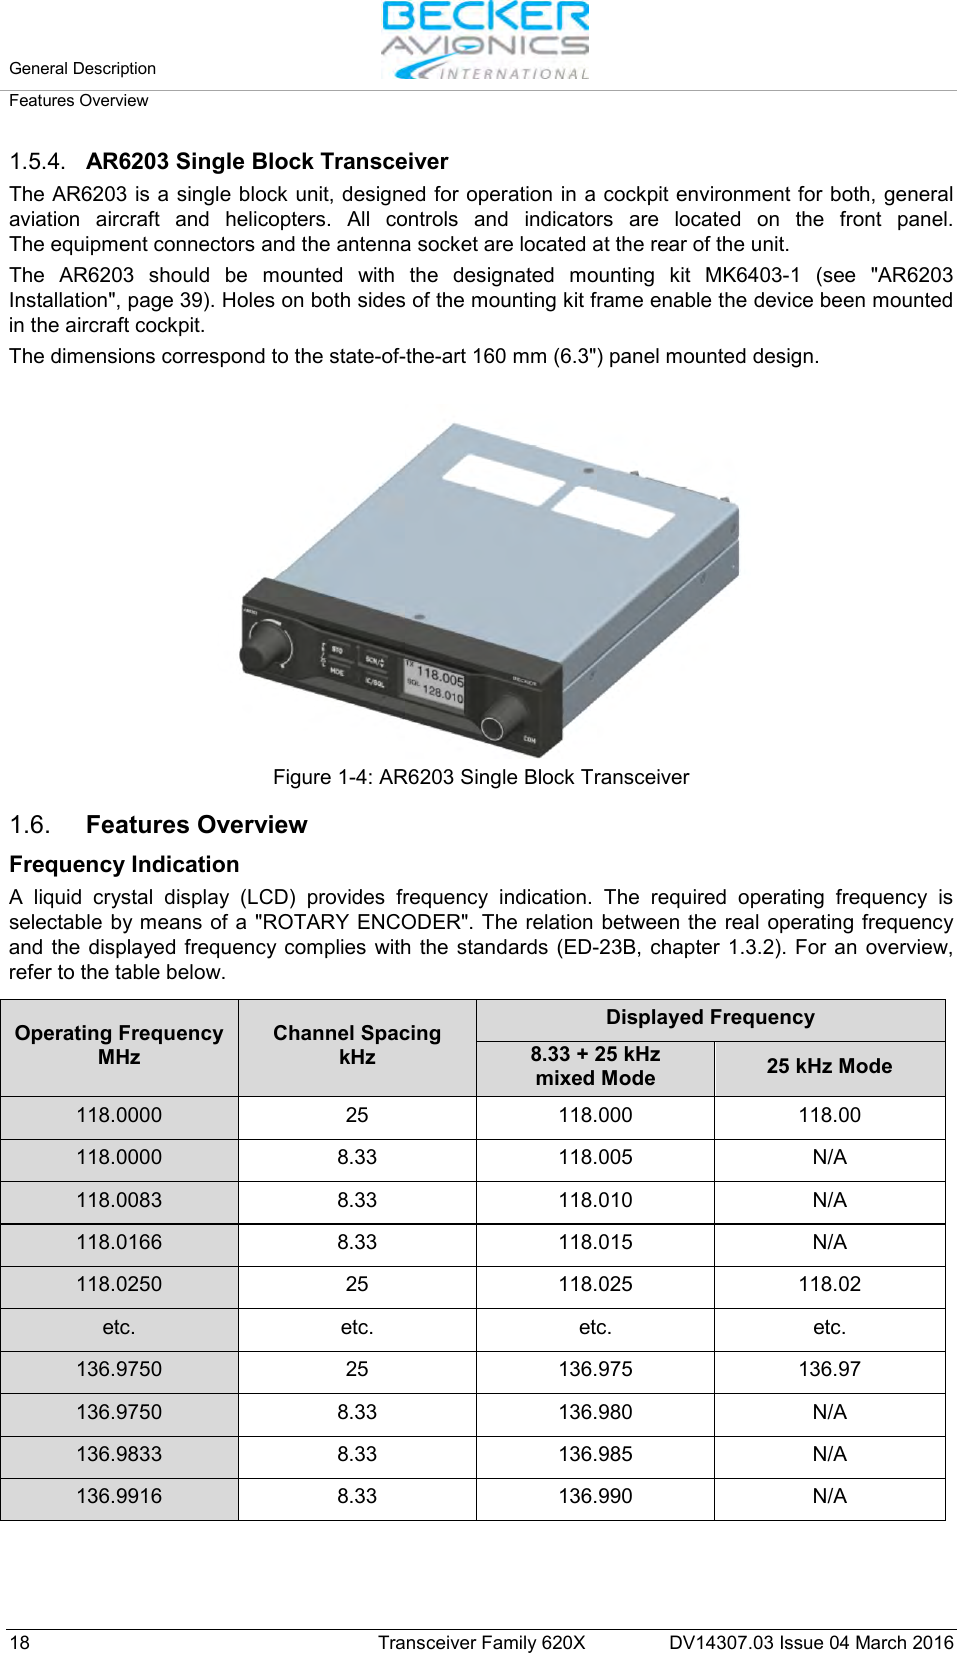 General Description   Features Overview  18 Transceiver Family 620X DV14307.03 Issue 04 March 2016 1.5.4. AR6203 Single Block Transceiver The AR6203 is a single block unit, designed for operation in a cockpit environment for both, general aviation aircraft and helicopters. All controls and indicators are located on the front panel.  The equipment connectors and the antenna socket are located at the rear of the unit. The AR6203 should be mounted with the designated mounting kit MK6403-1 (see  &quot;AR6203 Installation&quot;, page 39). Holes on both sides of the mounting kit frame enable the device been mounted in the aircraft cockpit. The dimensions correspond to the state-of-the-art 160 mm (6.3&quot;) panel mounted design.   Figure 1-4: AR6203 Single Block Transceiver  1.6. Features Overview Frequency Indication A liquid crystal display (LCD) provides frequency indication. The required operating frequency is selectable by means of a &quot;ROTARY ENCODER&quot;. The relation between the real operating frequency and the displayed frequency complies with the standards (ED-23B, chapter 1.3.2). For an overview, refer to the table below.  Operating Frequency MHz Channel Spacing  kHz Displayed Frequency 8.33 + 25 kHz  mixed Mode 25 kHz Mode 118.0000 25 118.000 118.00 118.0000 8.33 118.005 N/A 118.0083 8.33 118.010 N/A 118.0166 8.33 118.015 N/A 118.0250 25 118.025 118.02 etc. etc. etc. etc. 136.9750 25 136.975 136.97 136.9750 8.33 136.980 N/A 136.9833 8.33 136.985 N/A 136.9916 8.33 136.990 N/A    